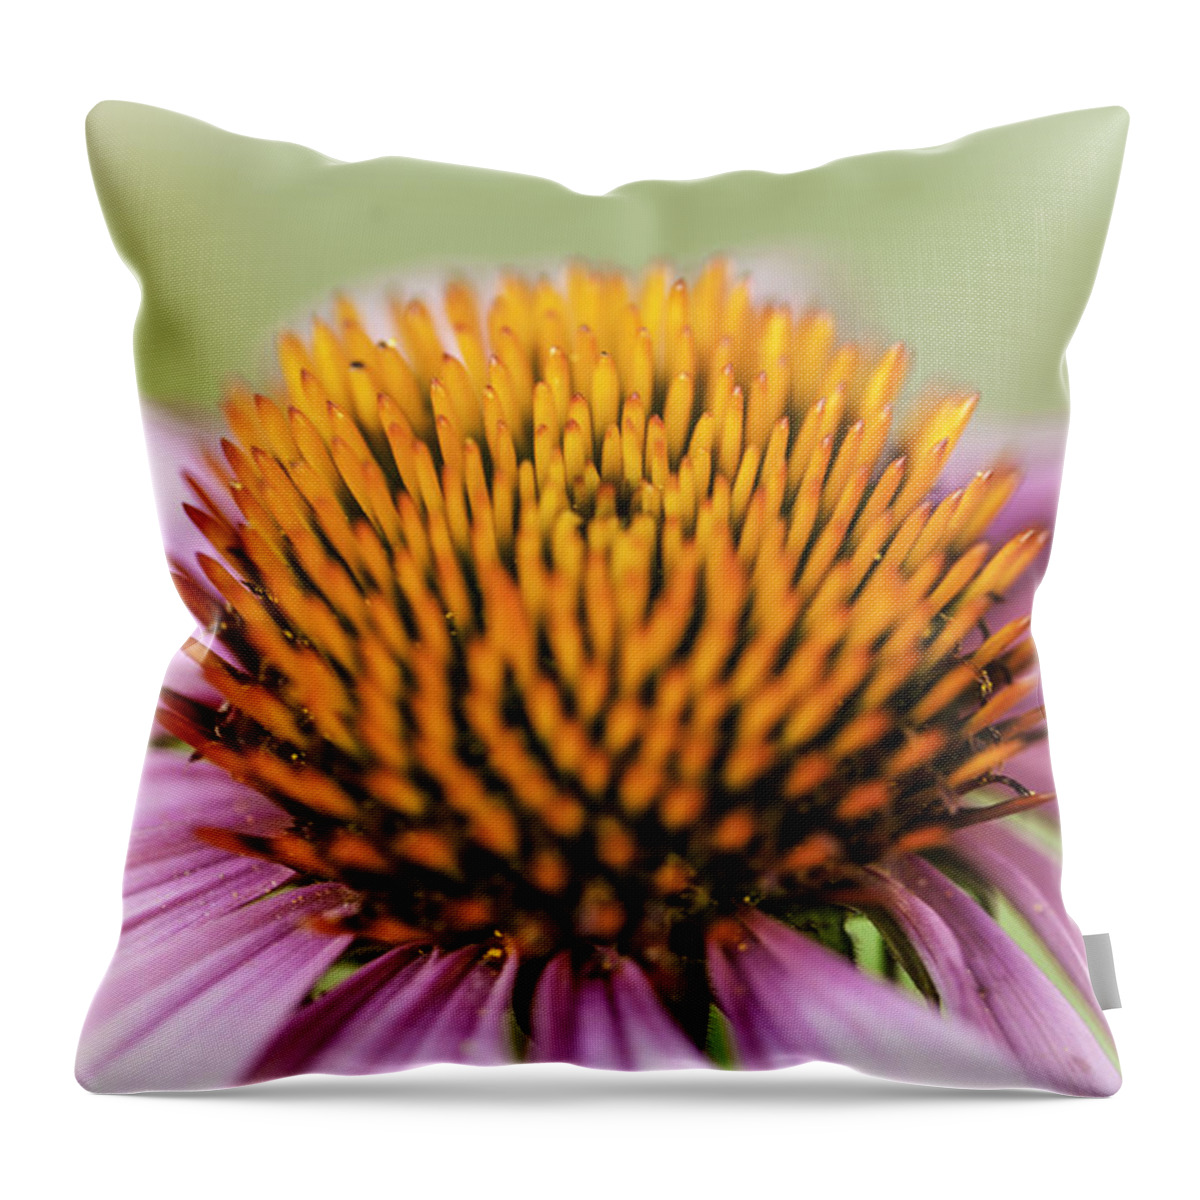 Coneflower Throw Pillow featuring the photograph Coneflower by Kate Hannon